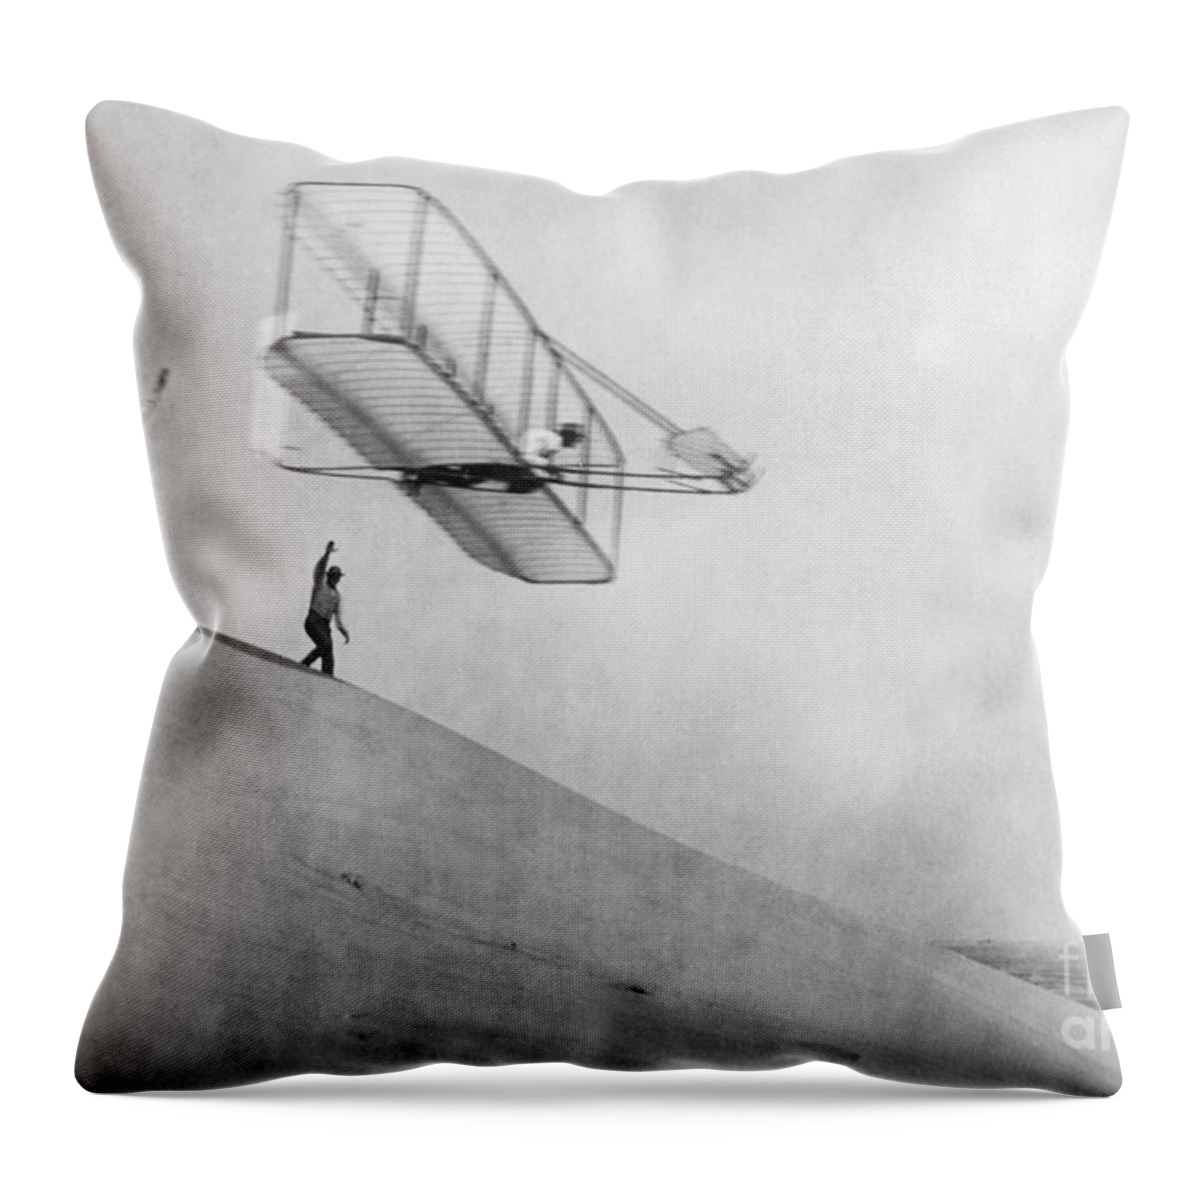 History Throw Pillow featuring the photograph Wilbur Wright Pilots Early Glider 1901 by Science Source